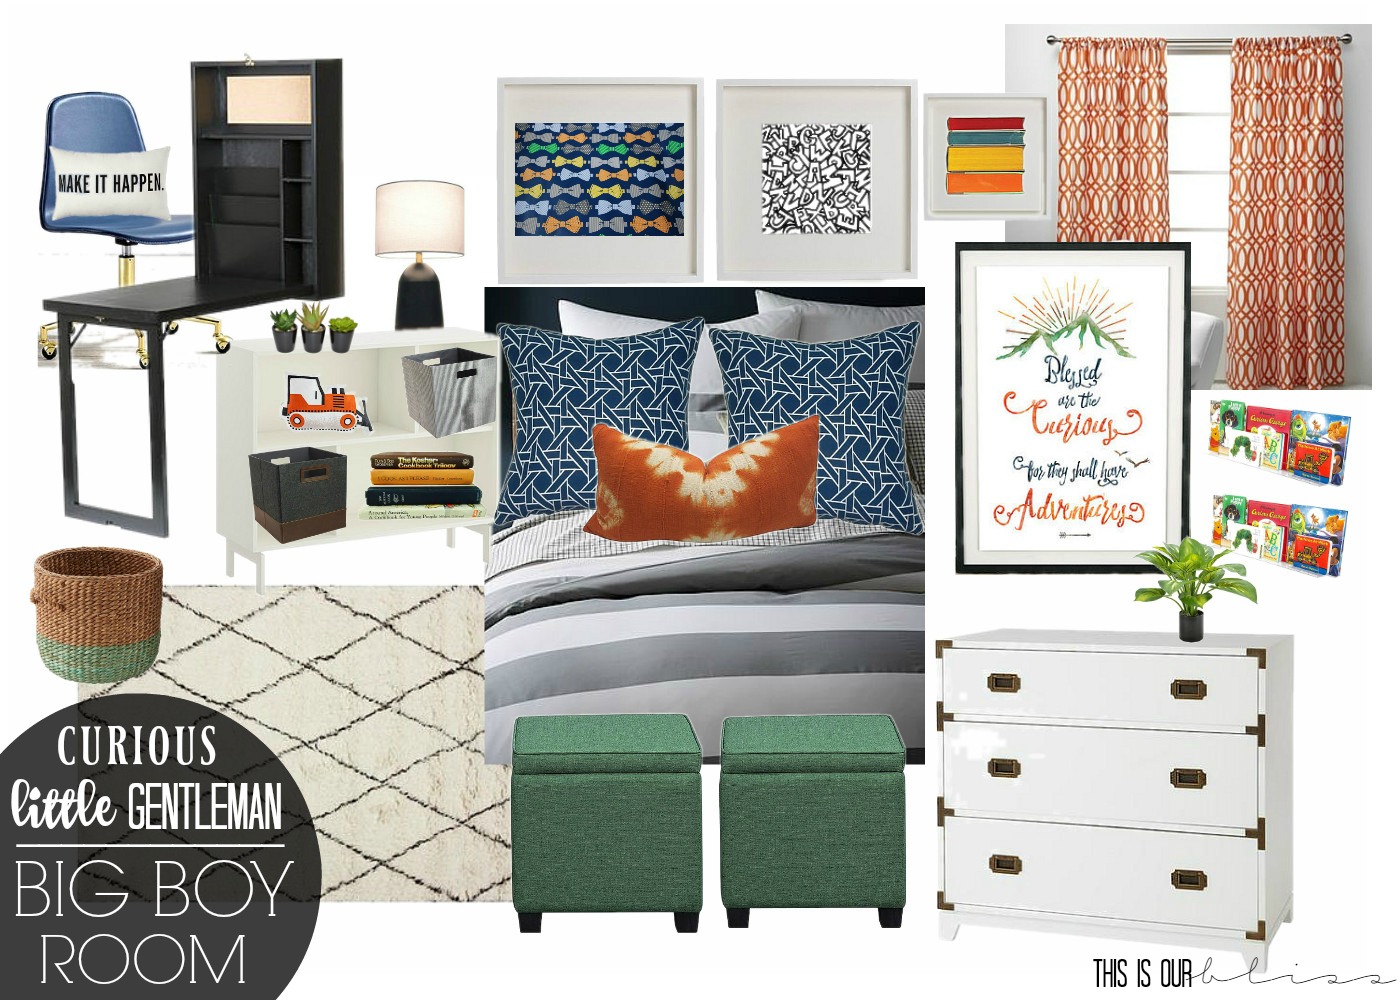 Curious Little Gentleman Big Boy Room Design Board | This is our Bliss | www.thisisourbliss.com